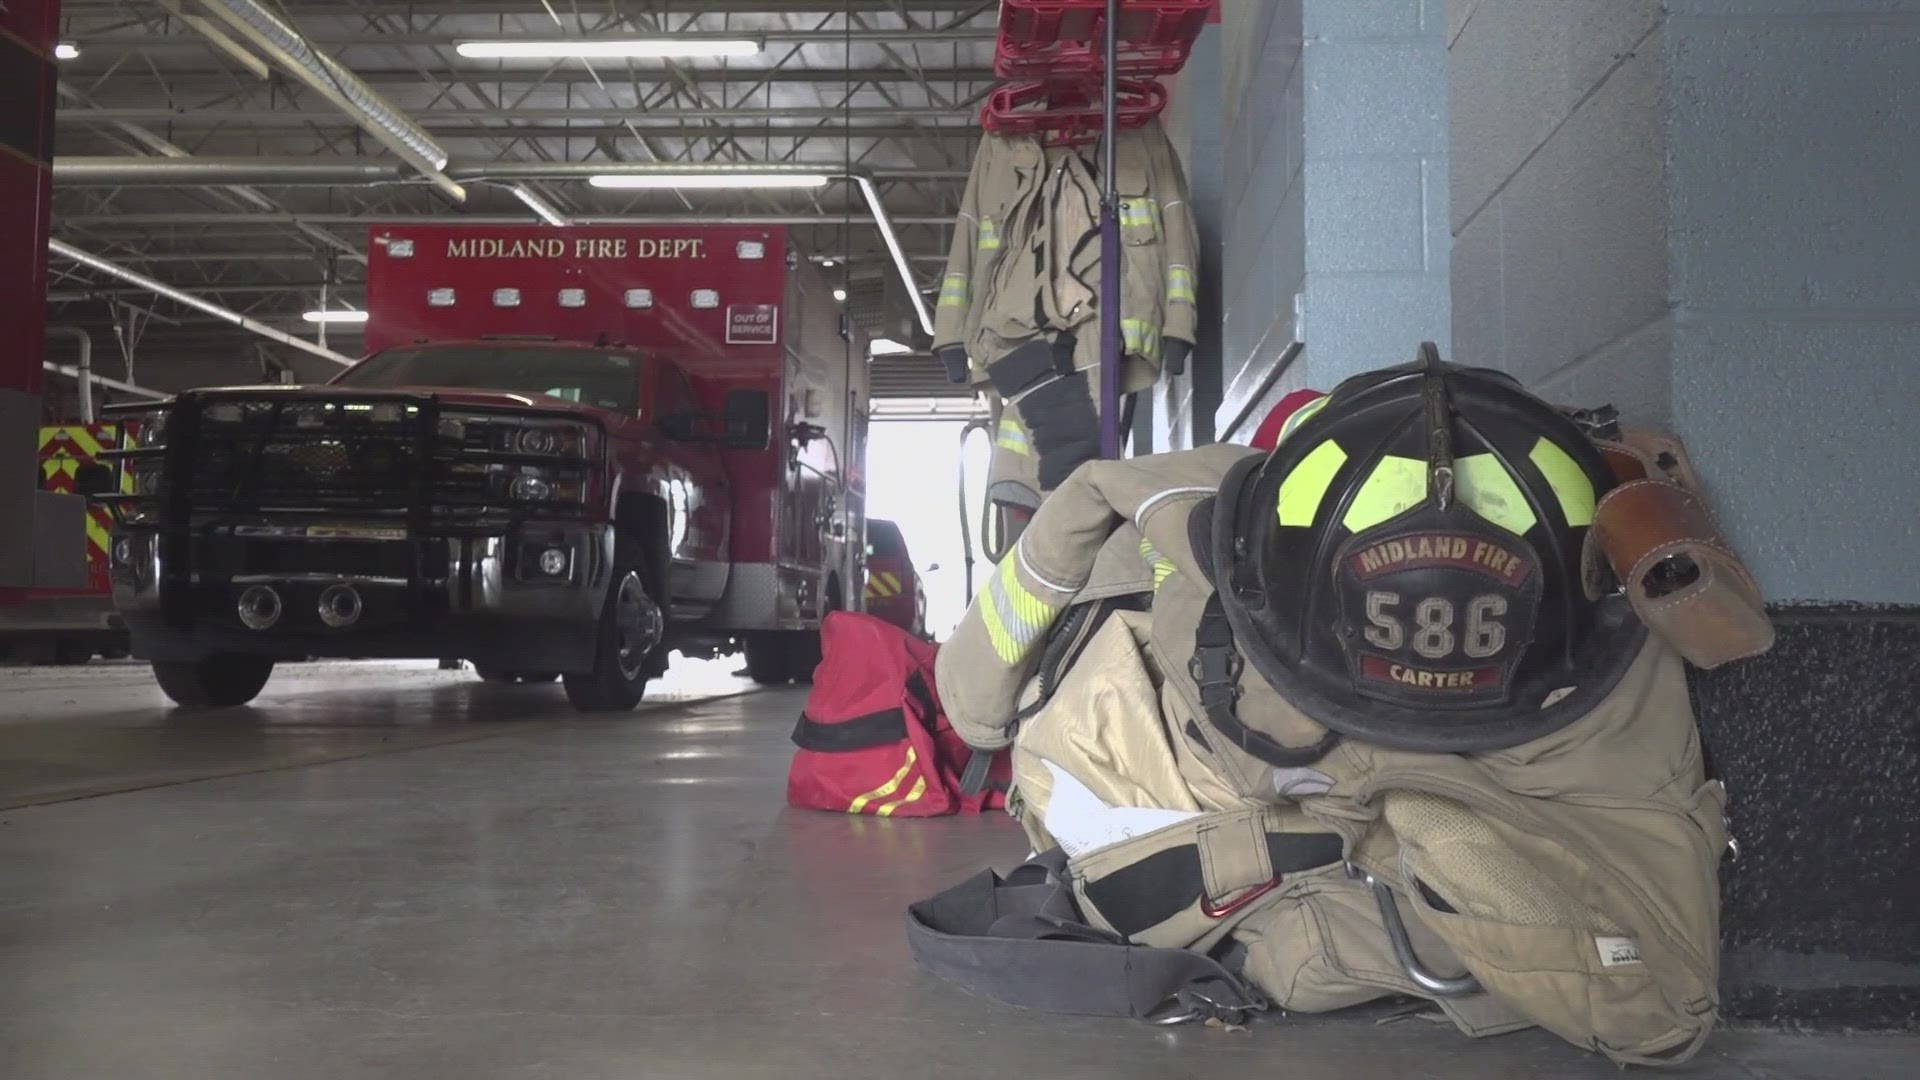 "Whenever an outside agency requests us, we gear up and go help with whatever they need,” said Cody Ritchie, assistant chief of operations for Odessa Fire Rescue.